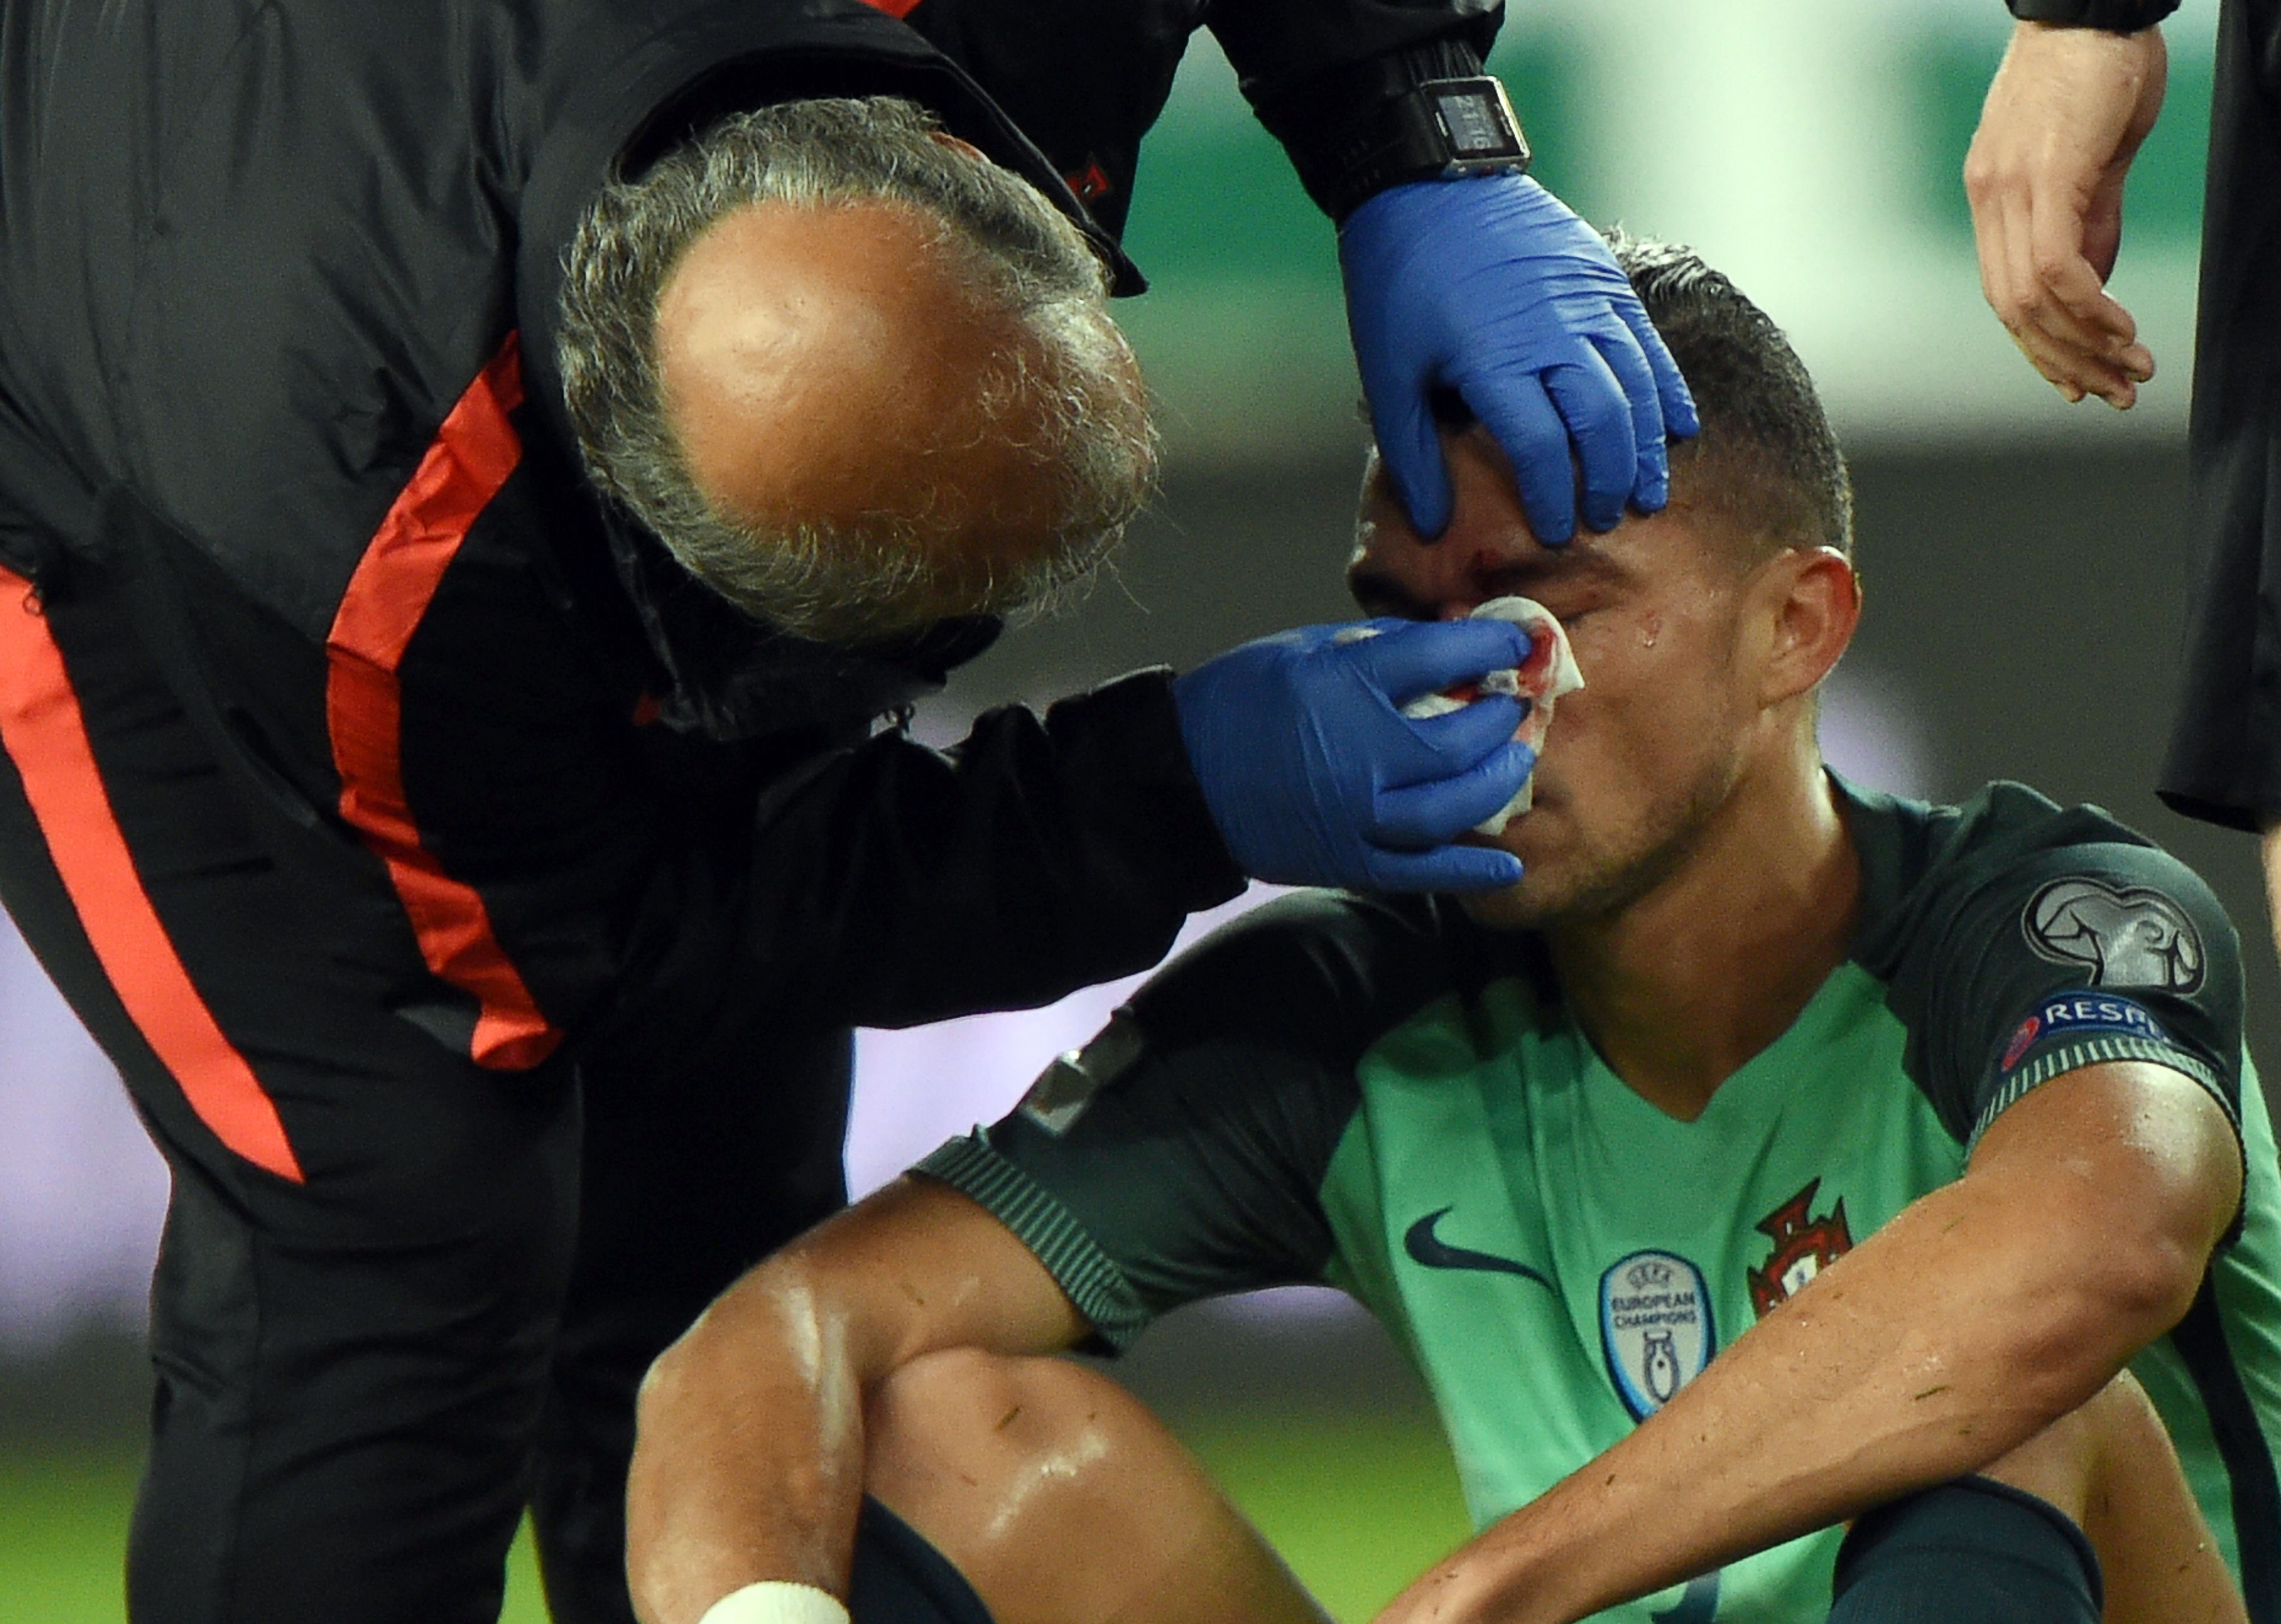 Portugal's Pepe is helped by a doctor during the FIFA World Cup 2018 qualification football match between Hungary and Portugal in Budapest on September 3, 2017. / AFP PHOTO / ATTILA KISBENEDEK        (Photo credit should read ATTILA KISBENEDEK/AFP/Getty Images)